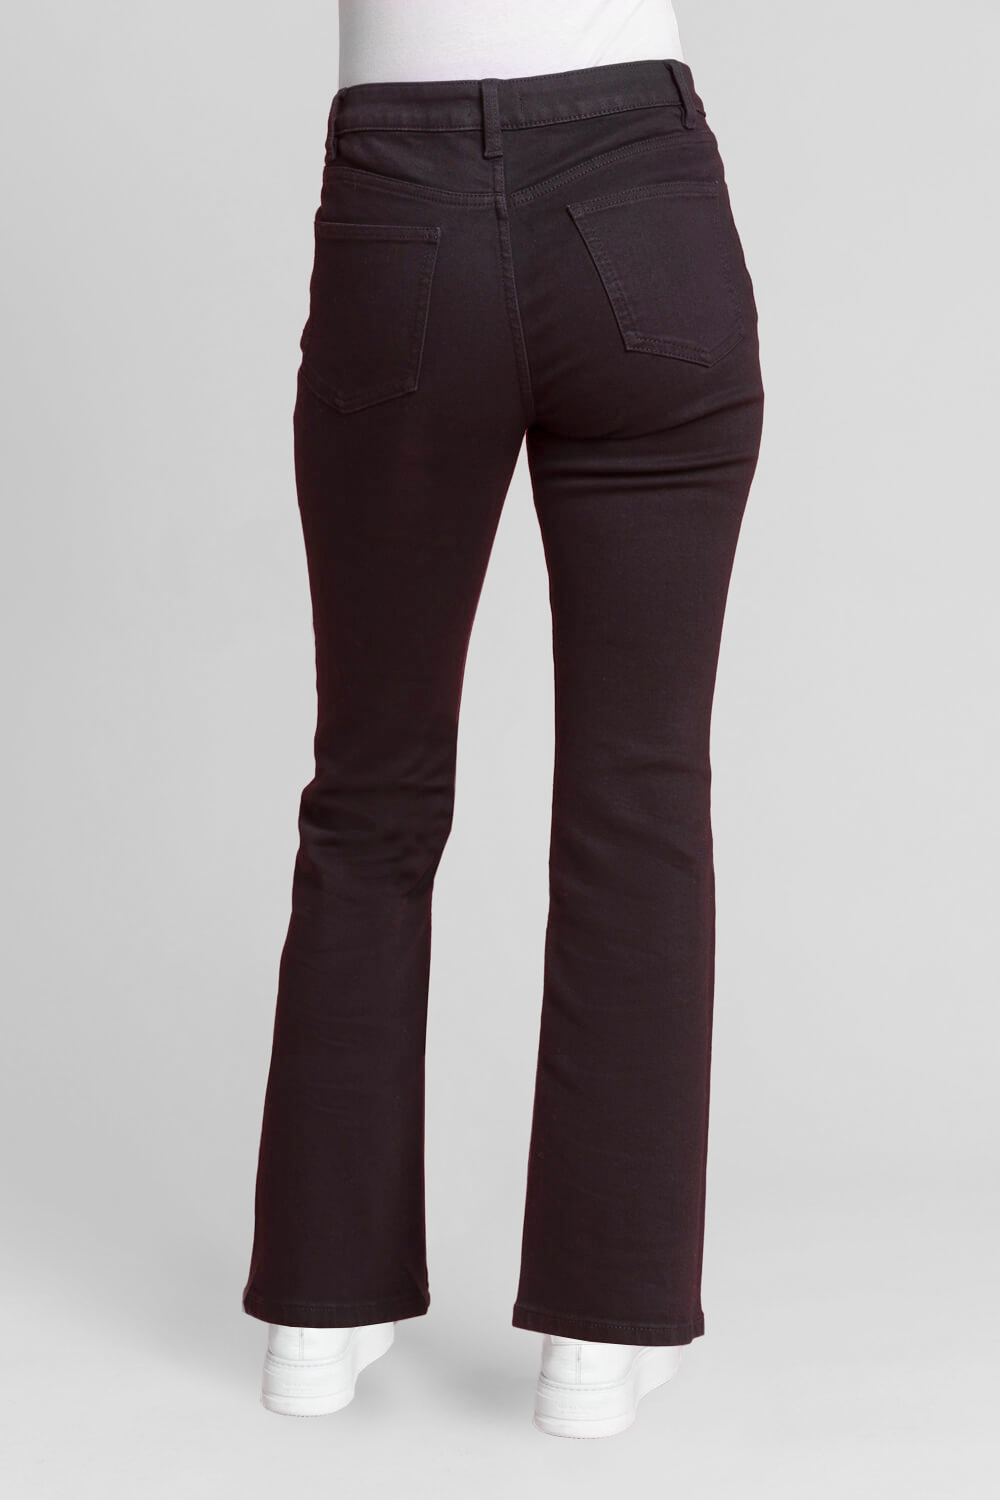 Black 29" Essential Stretch Bootcut Jeans, Image 2 of 4